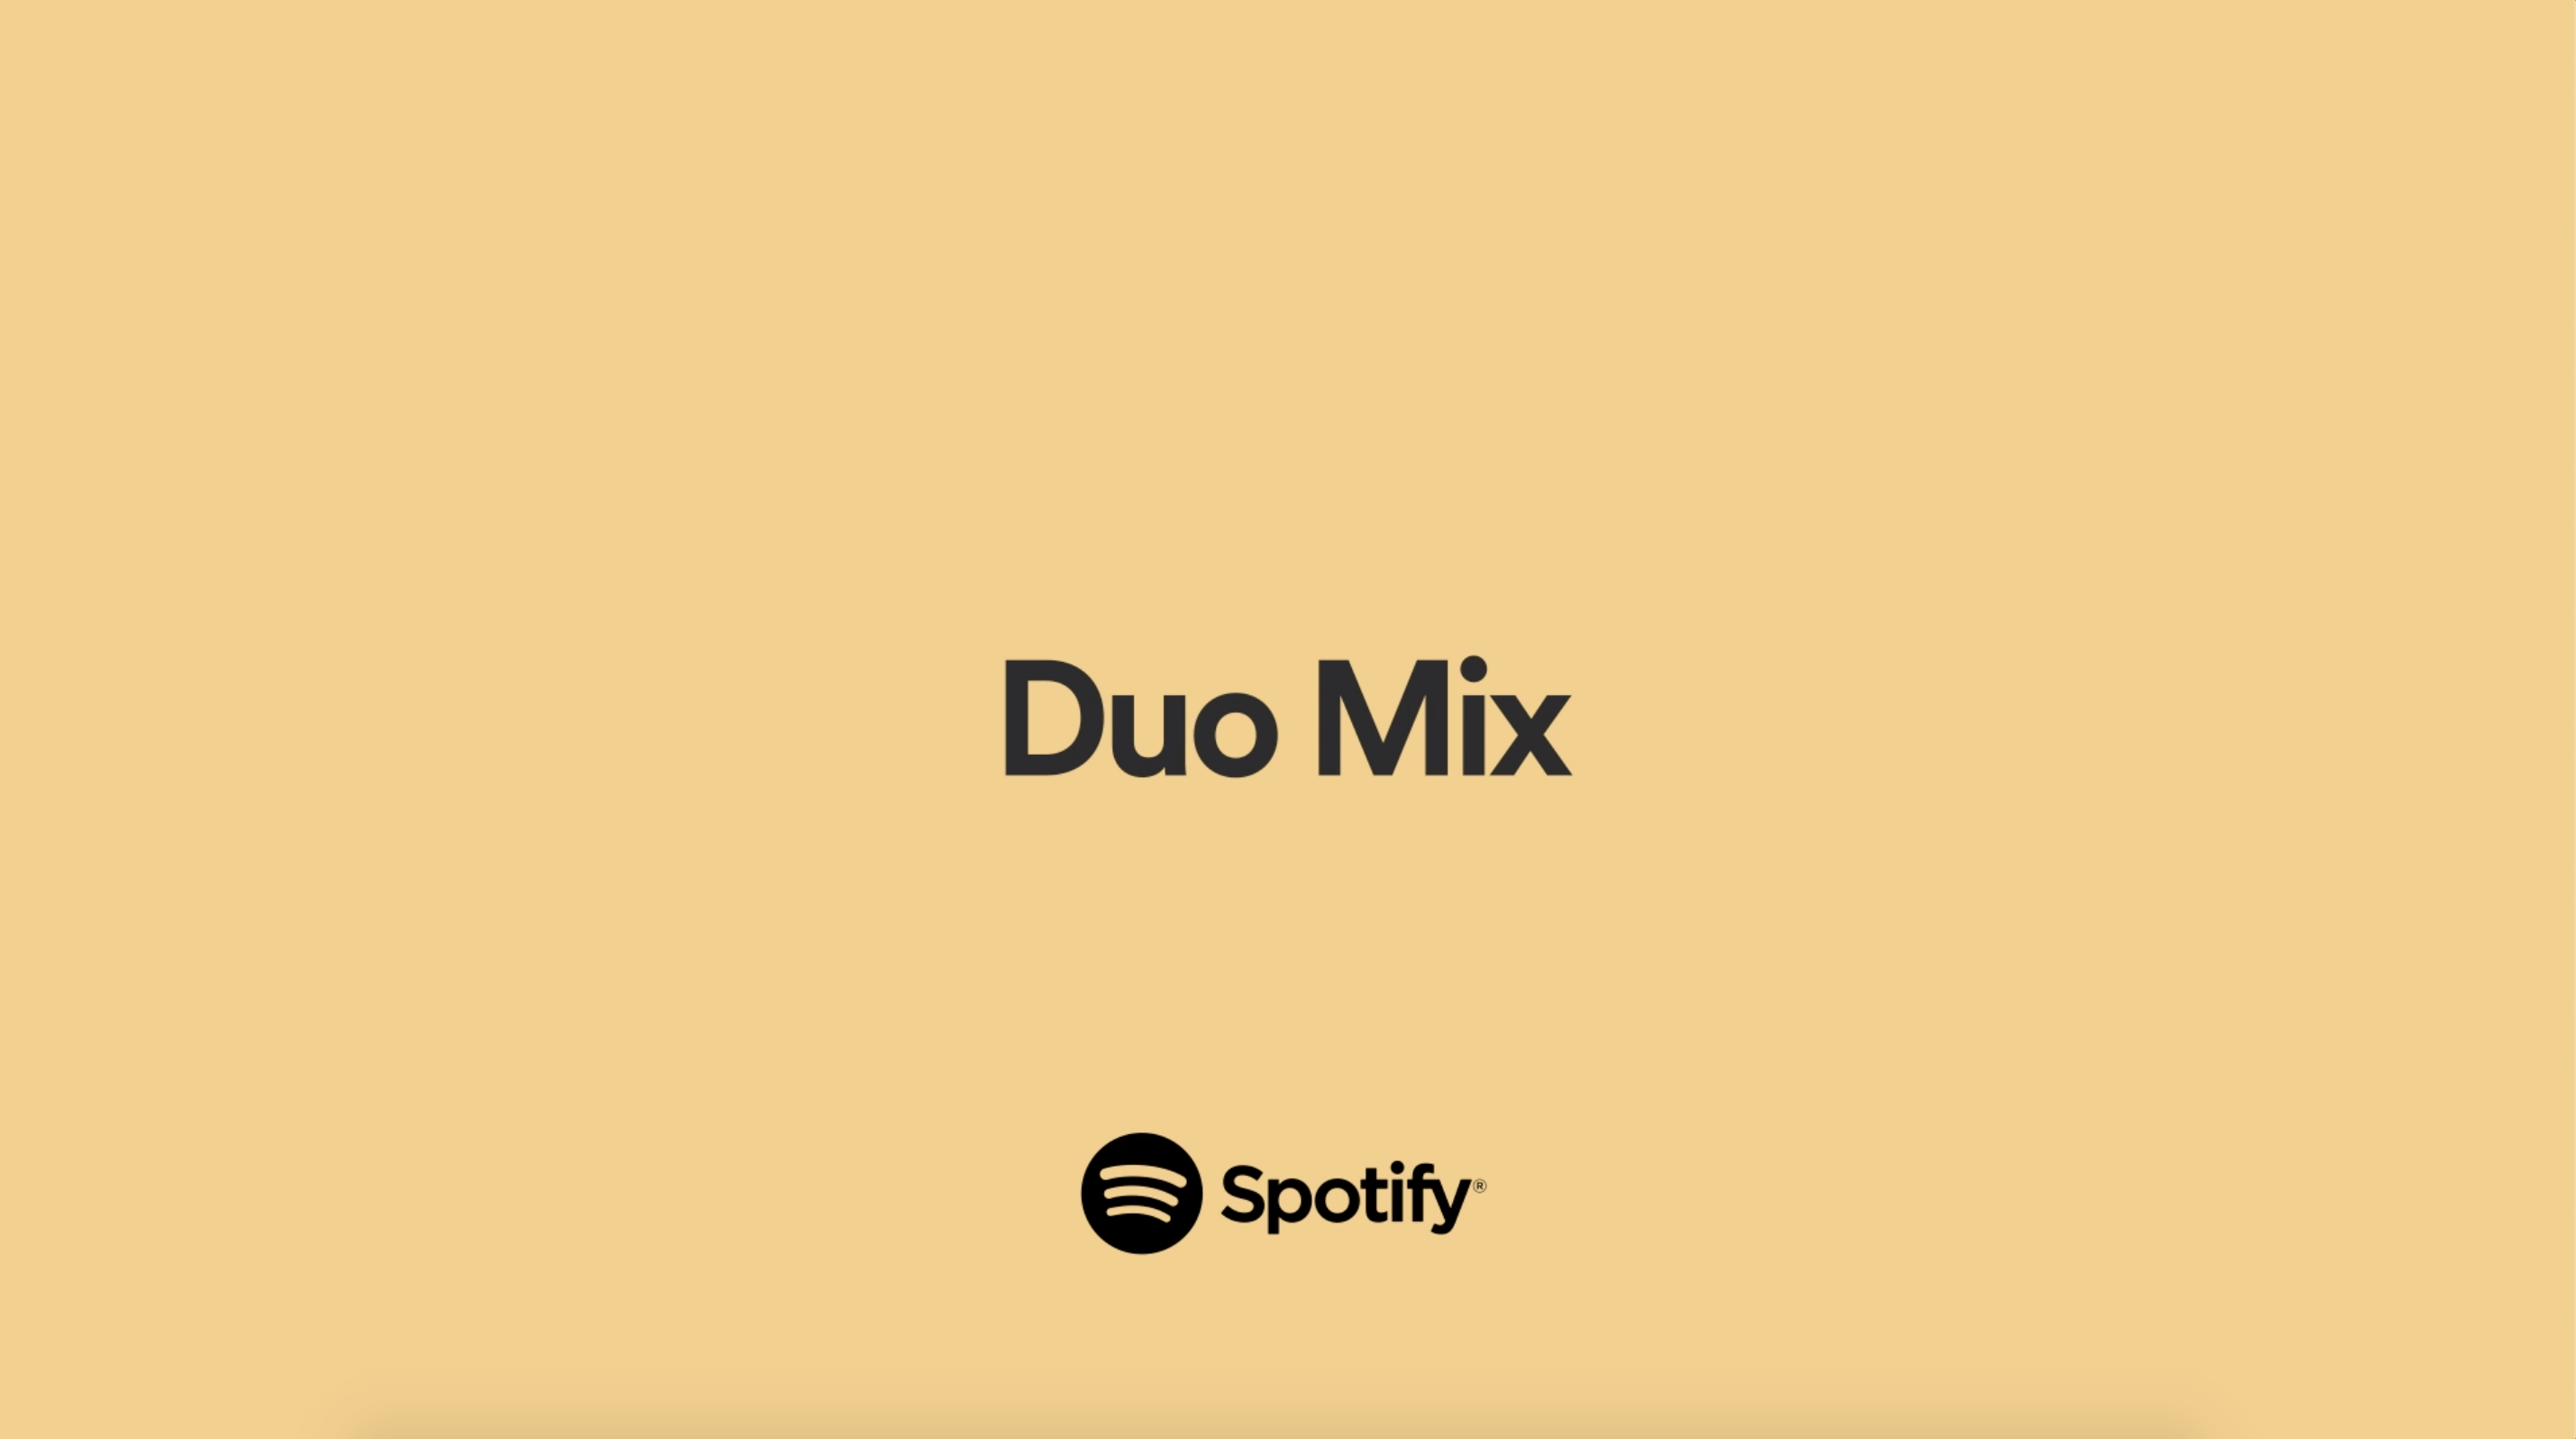 New Spotify Premium Duo Subscription Plan Launches in 55 Markets